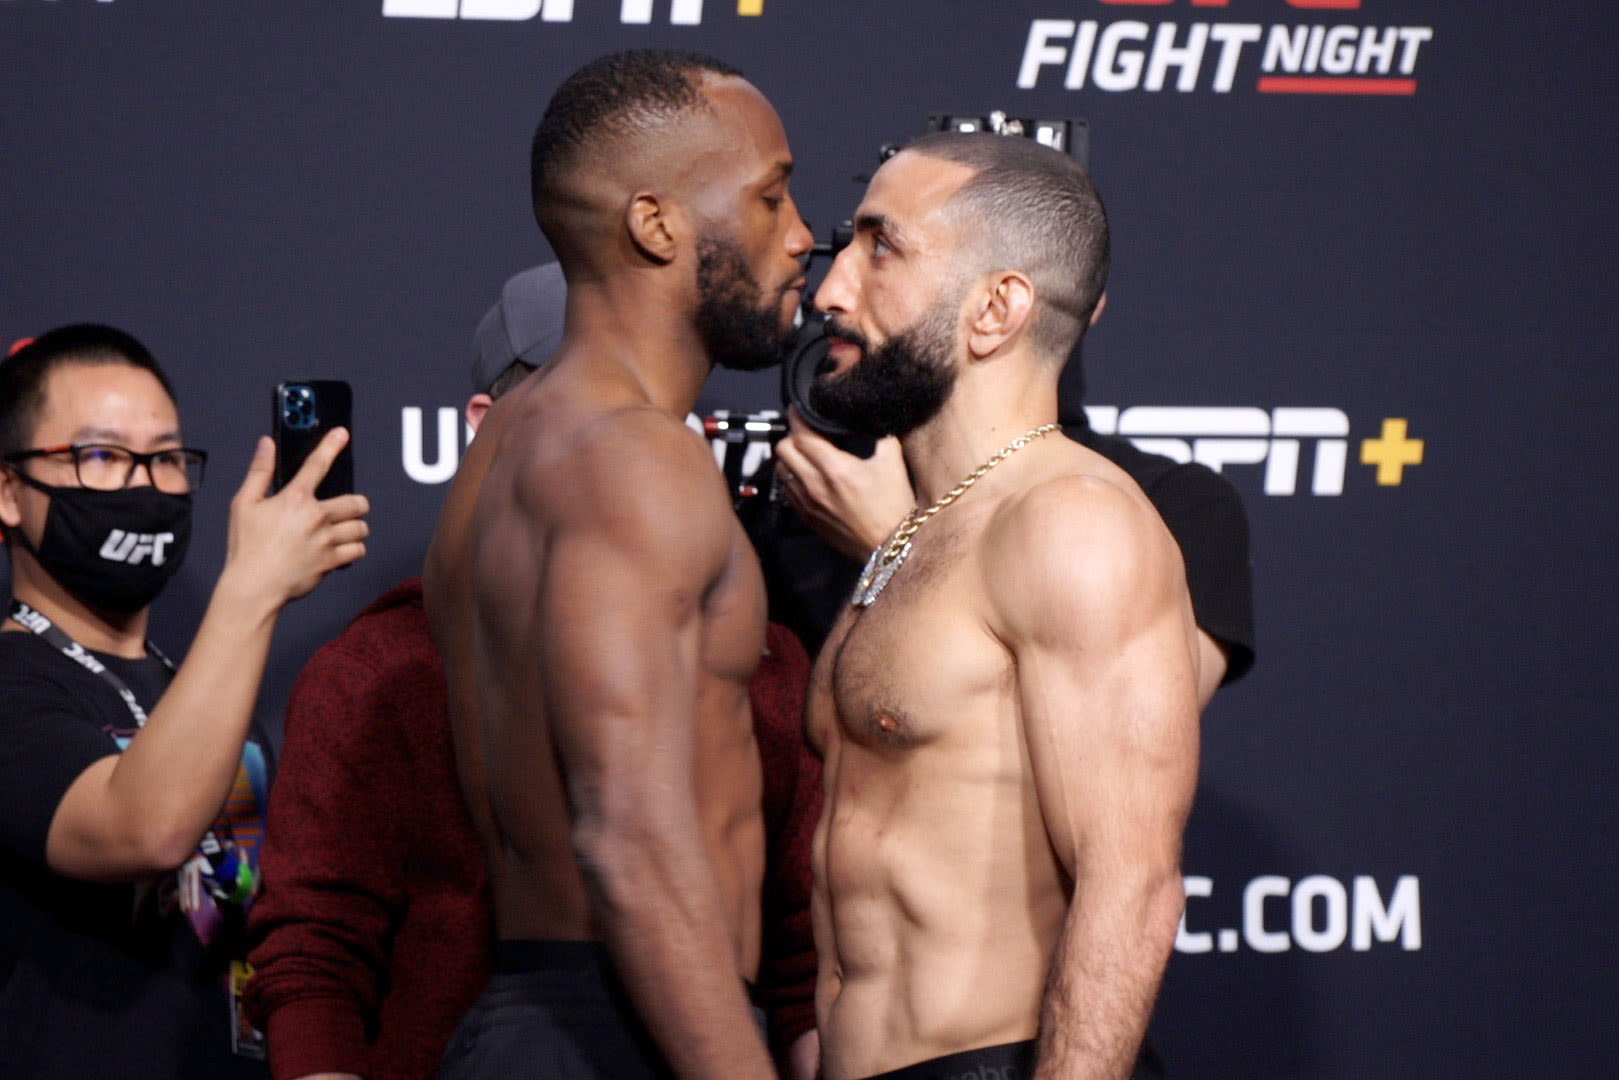 Leon Edwards vs. Belal Muhammad 2: Odds and what to know ahead of UFC 304 main event